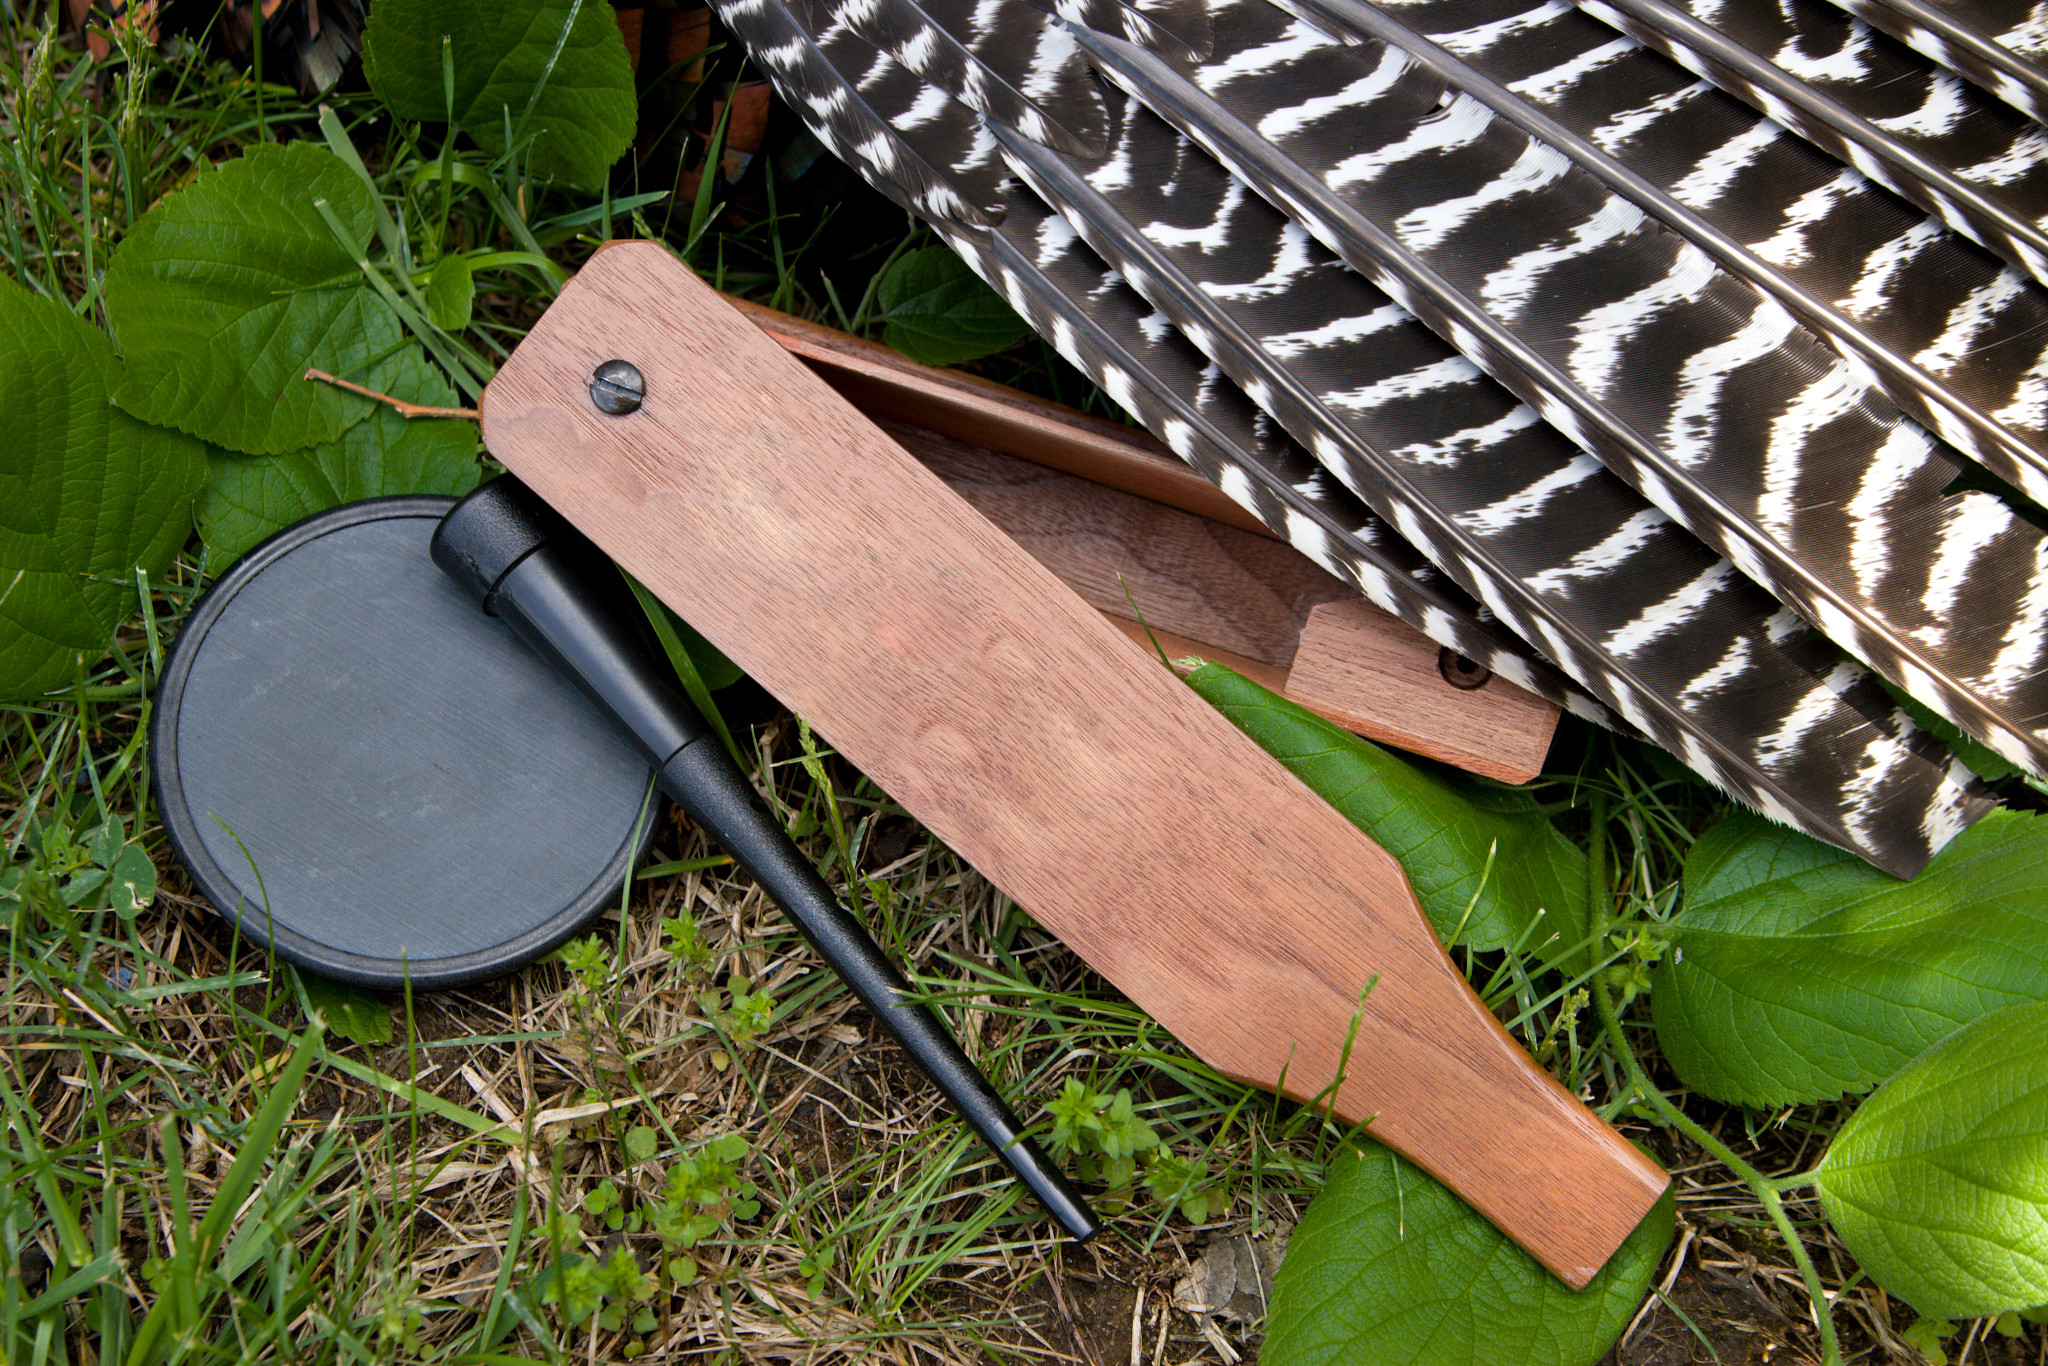 A box call and slate call, tools used to lure in a wild turkey, along with a wild turkey wing